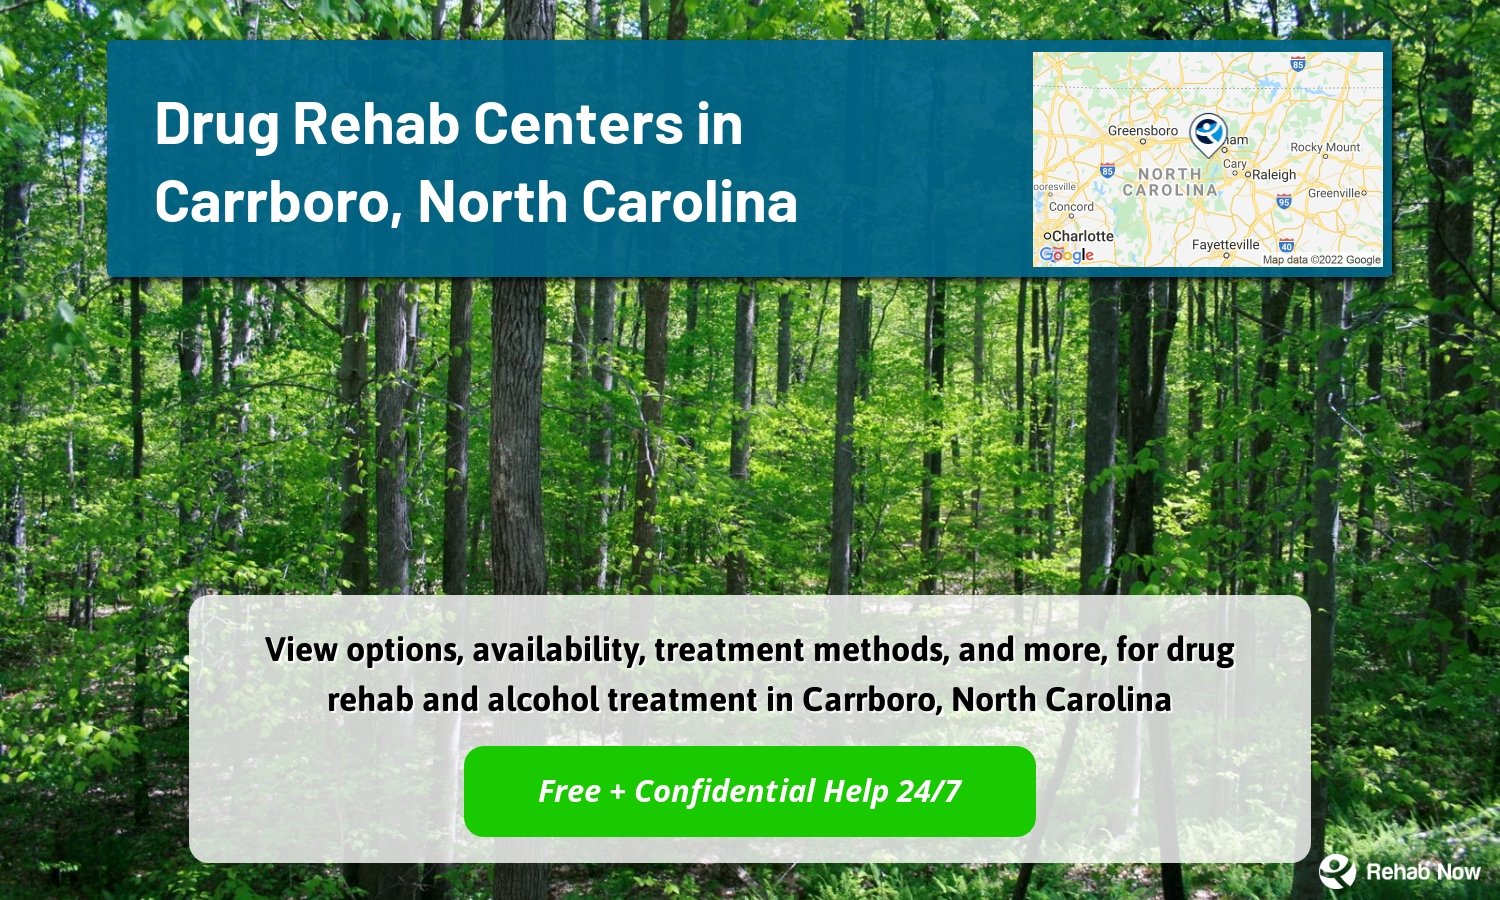 View options, availability, treatment methods, and more, for drug rehab and alcohol treatment in Carrboro, North Carolina